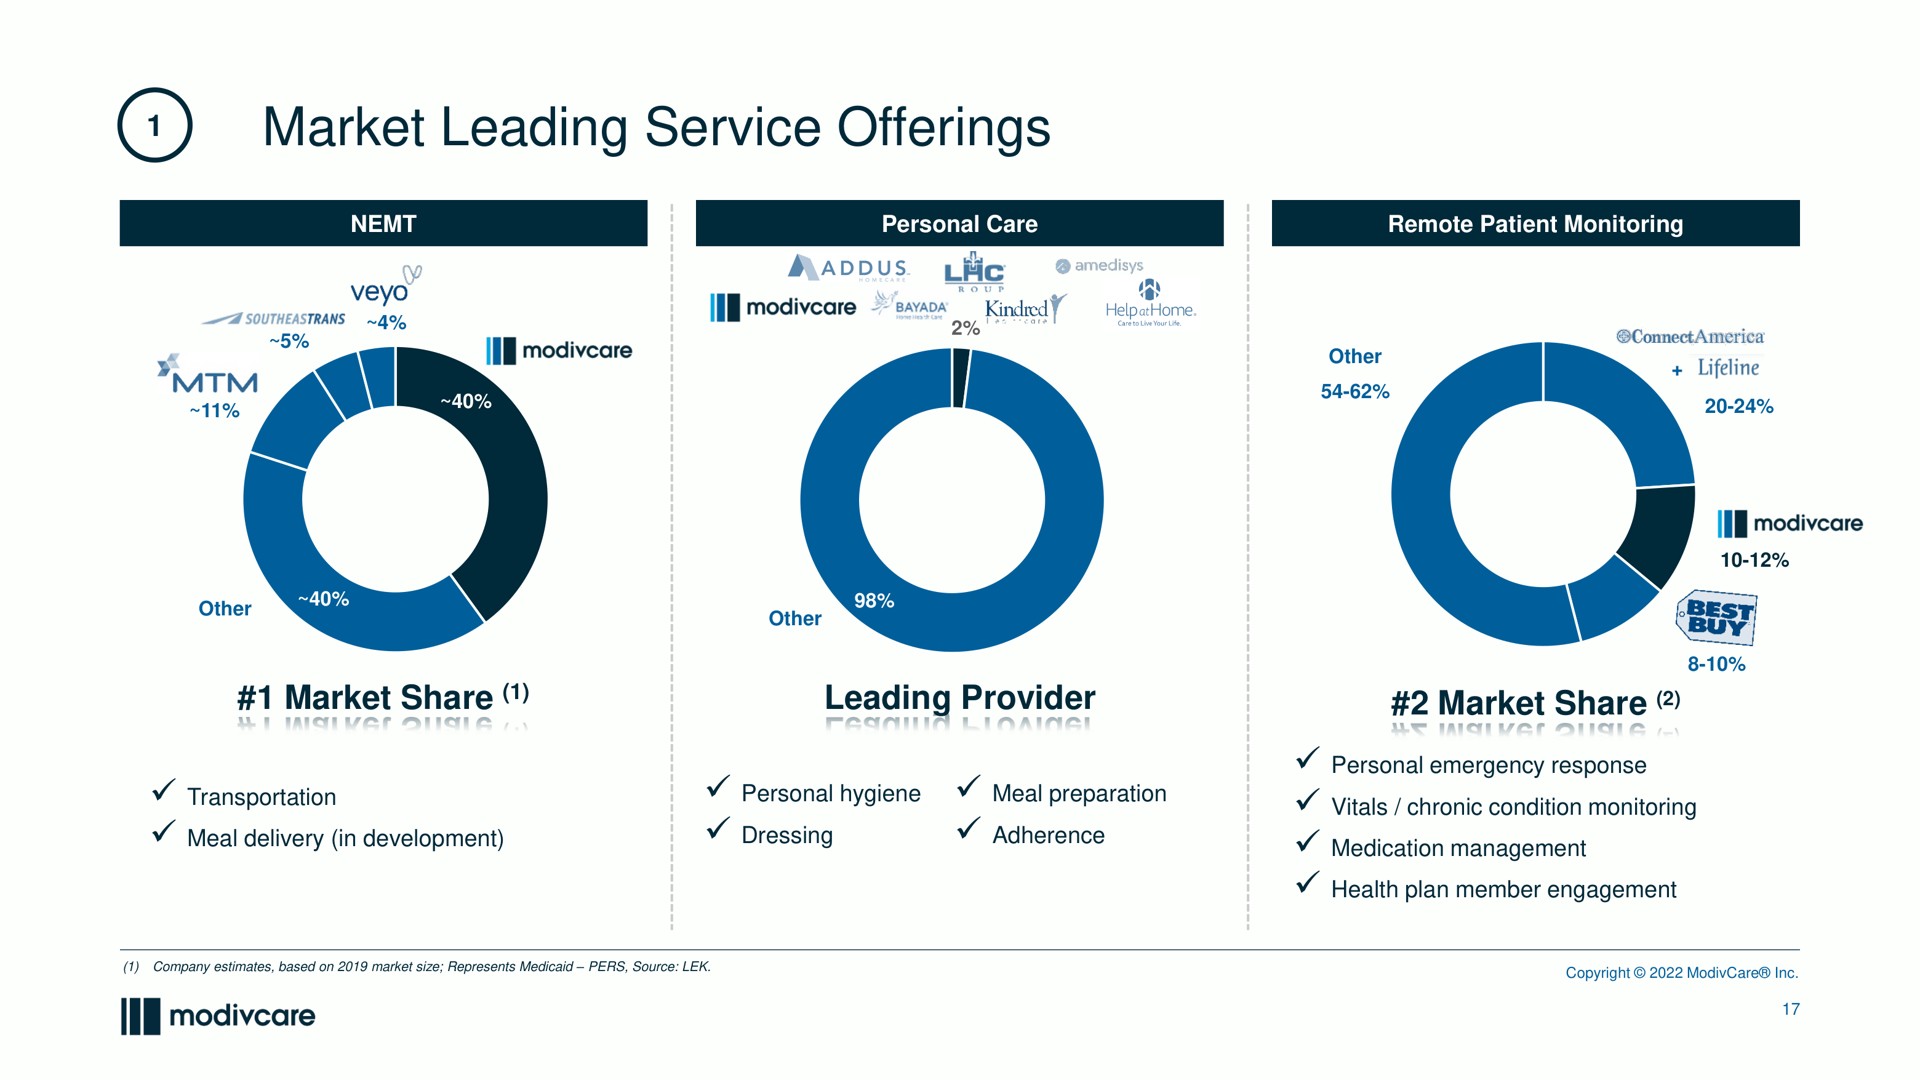 market leading service offerings market share leading provider market share it by | ModivCare